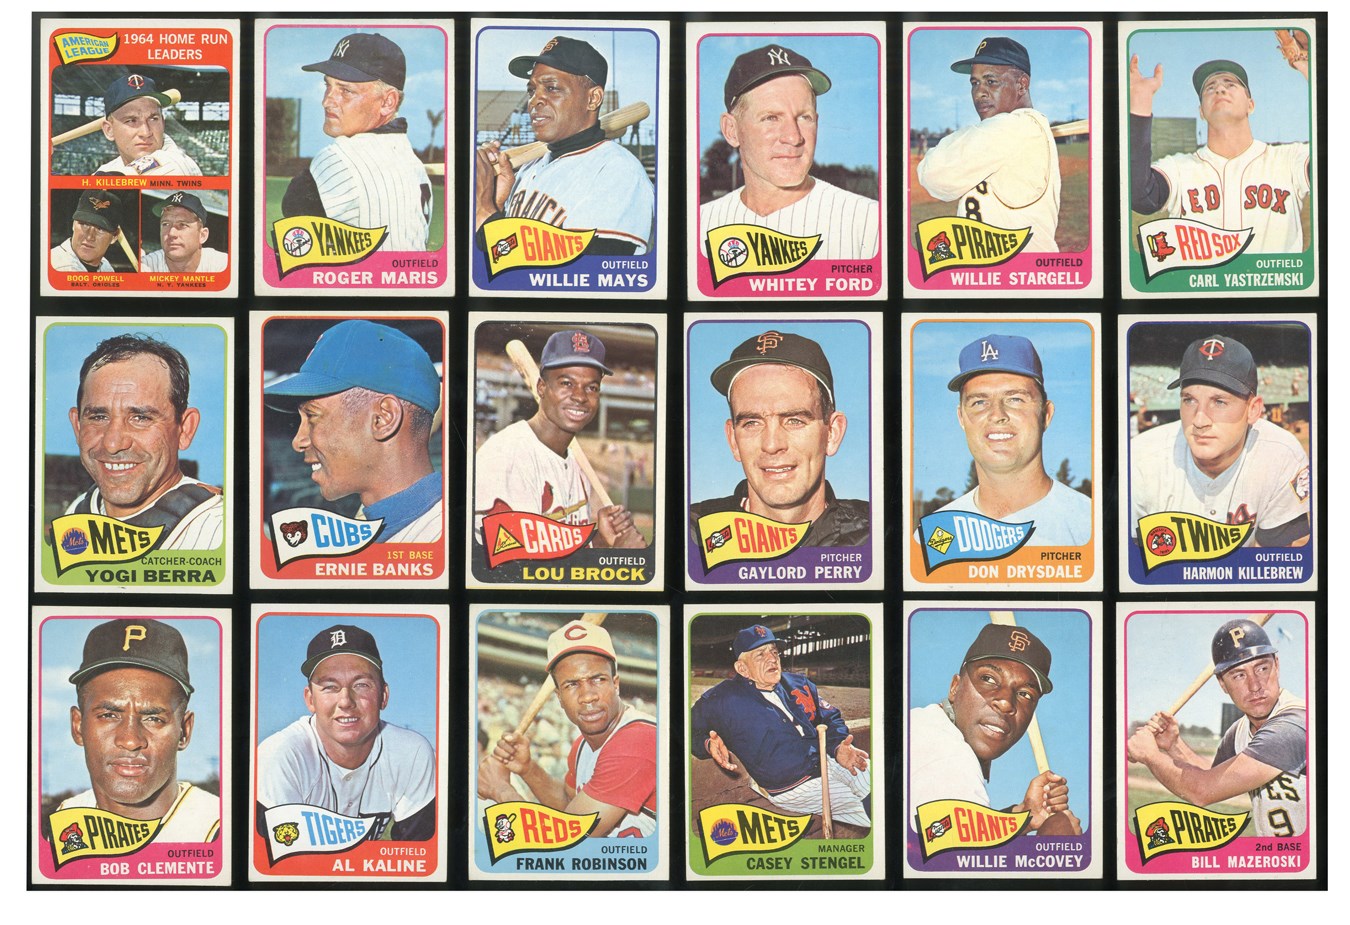 Baseball and Trading Cards - 1965 Topps Hall of Famer and Star Card Lot (30) with Clemente and Mays